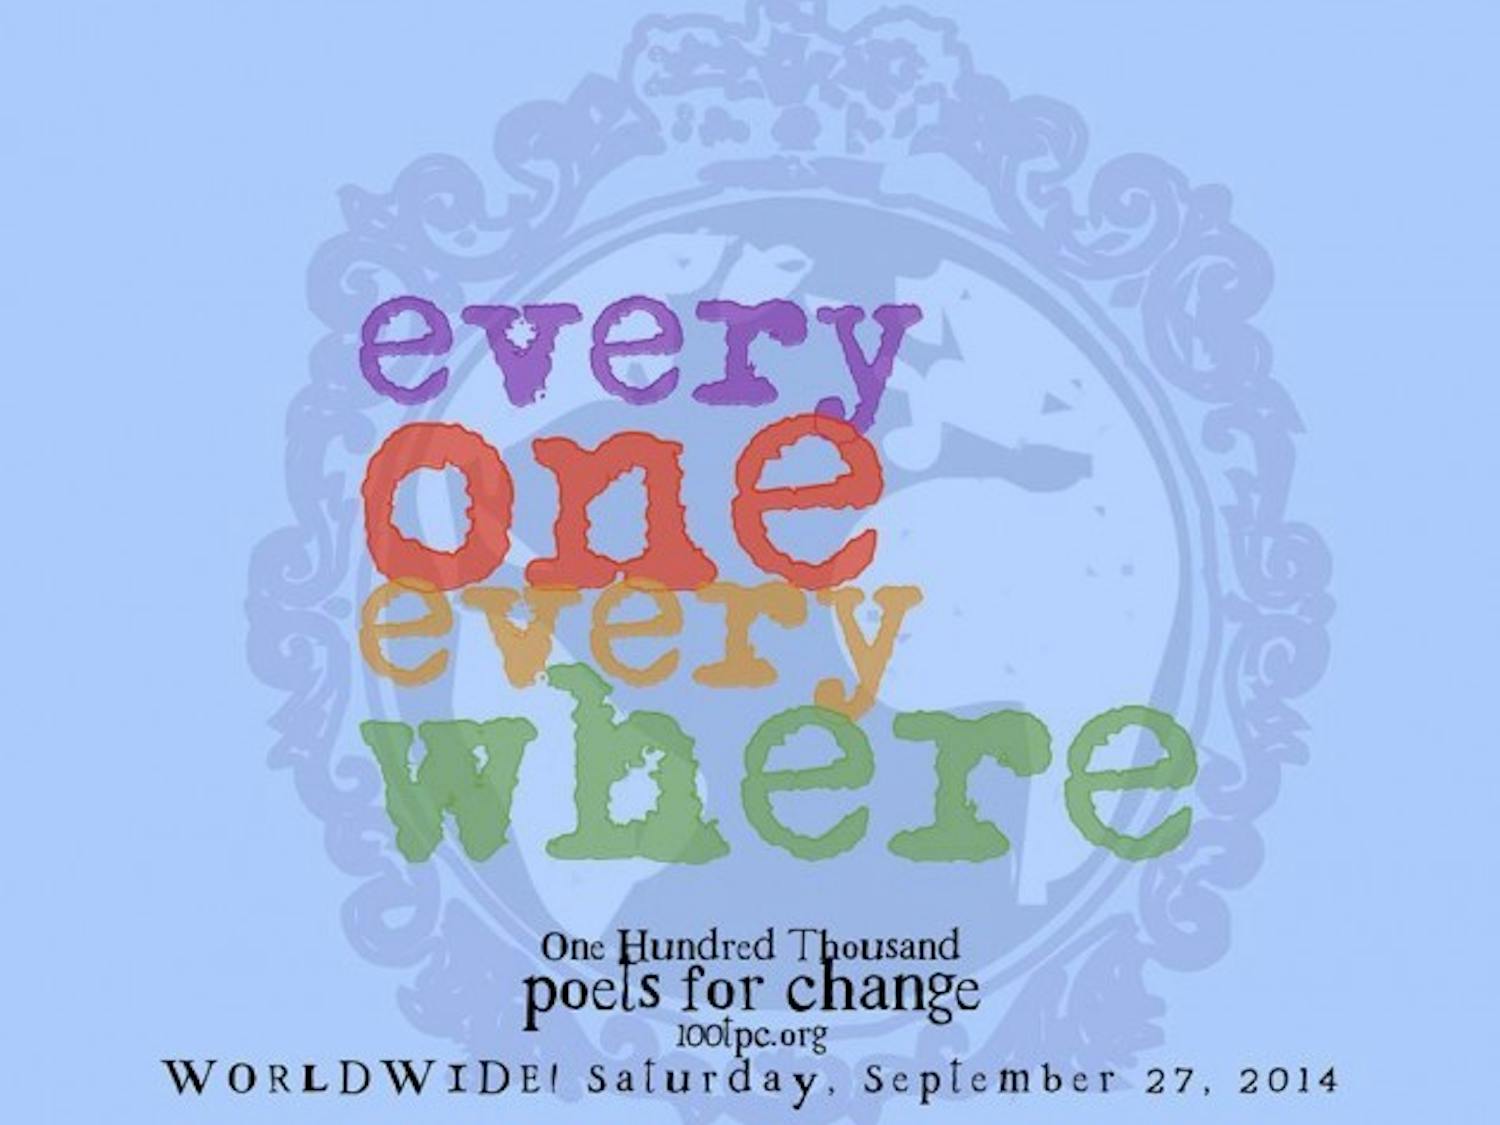 Captionn Sept. 27, hundreds of cities from across the world will participate in 100TPC by hosting poetry readings and performances to inspire change.